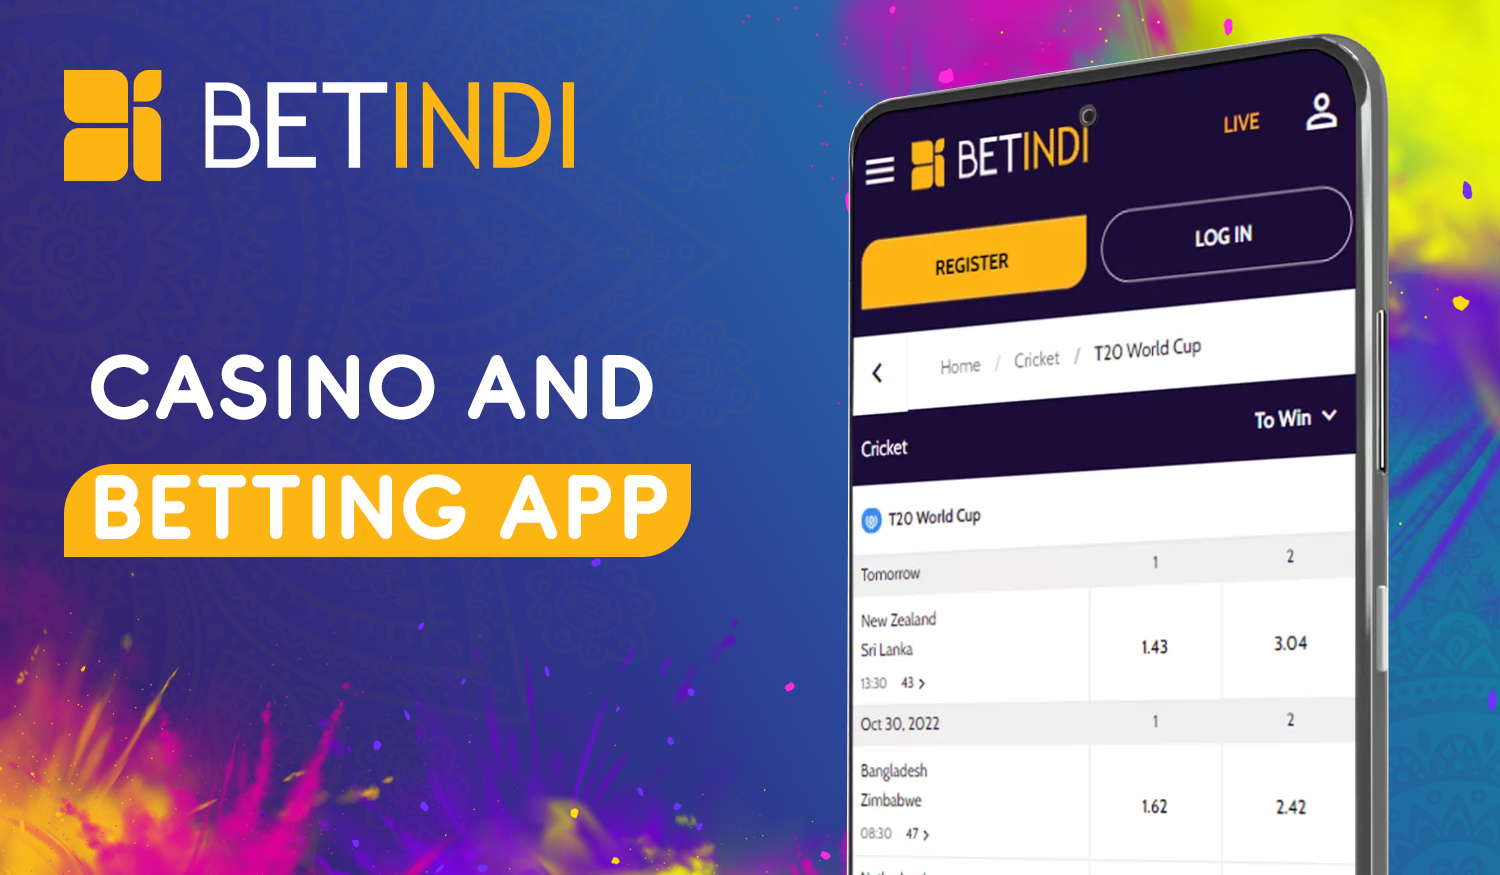 Betindi mobile app for sports betting and online casinos